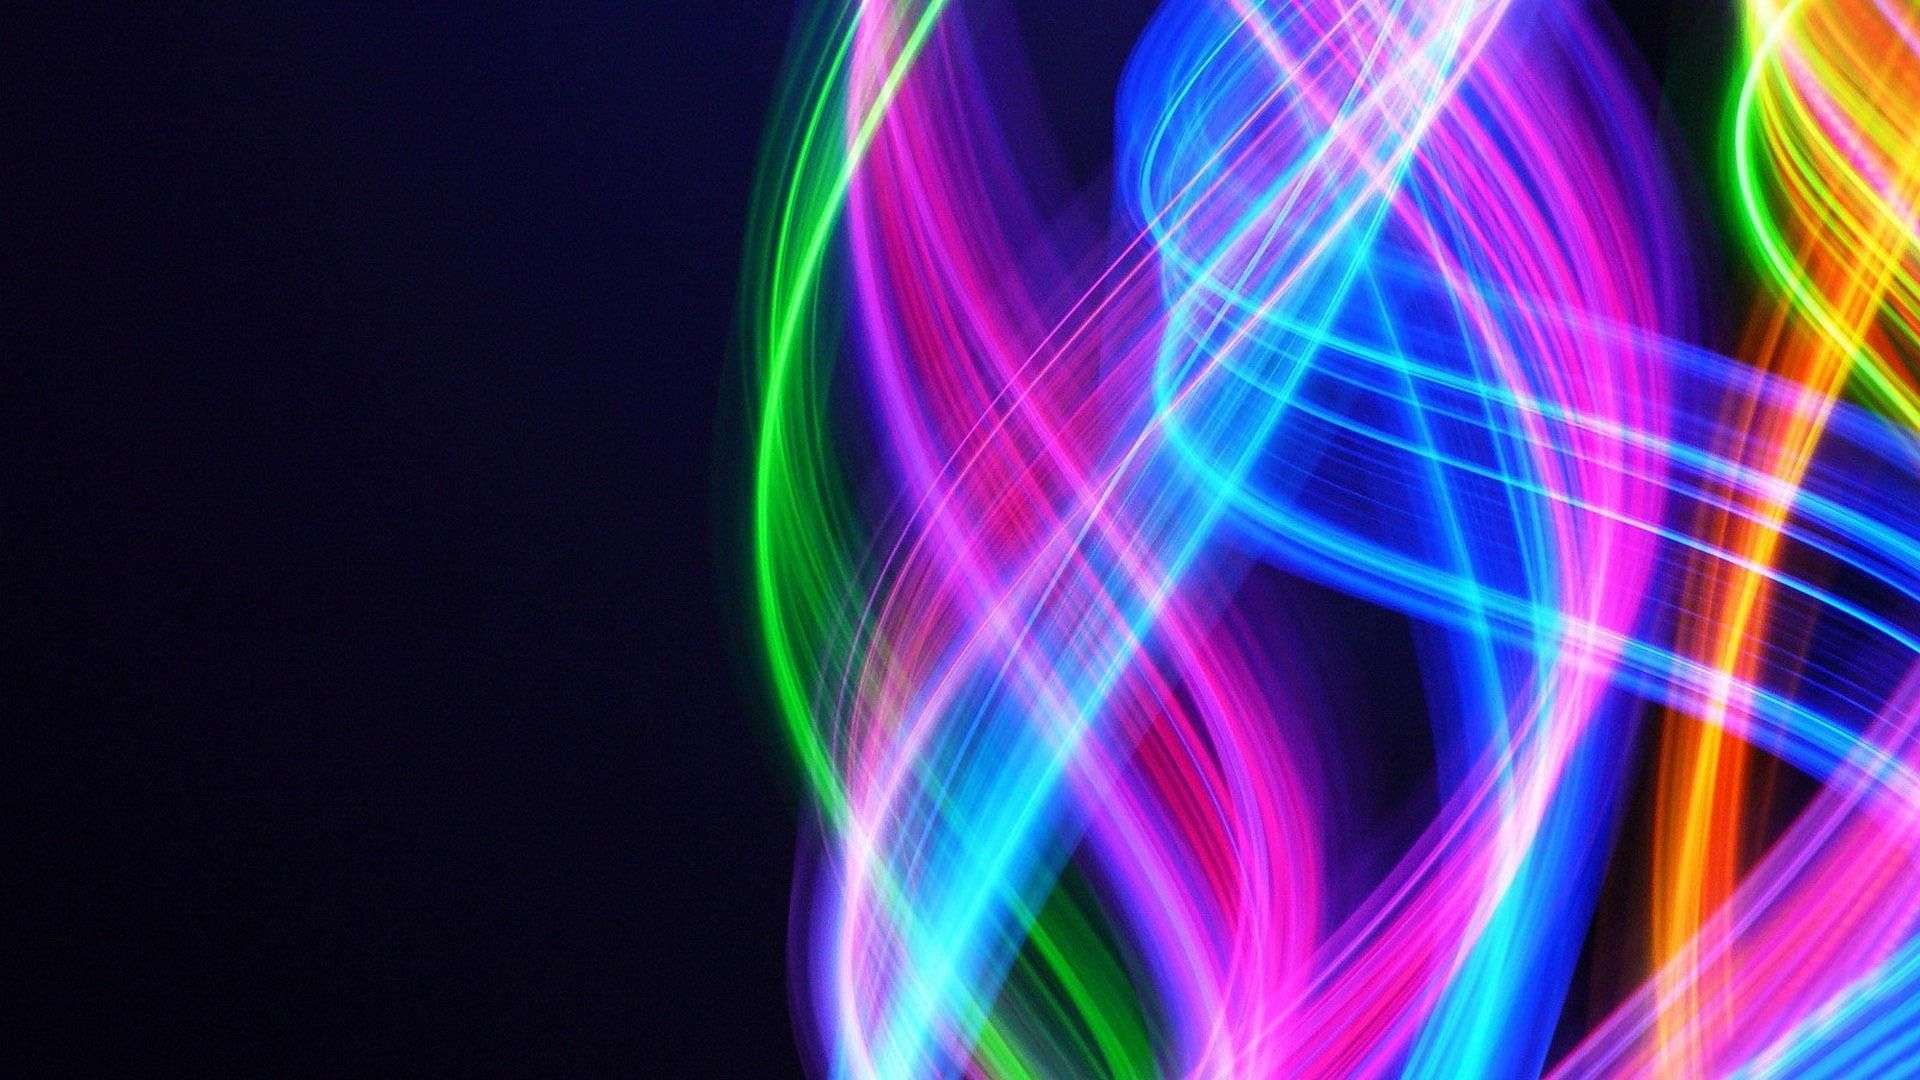 Neon waves, pink green and blue spiral colors #abstract x1080 #wave #neon P #wallpaper #h. Cool background wallpaper, Neon wallpaper, Neon background